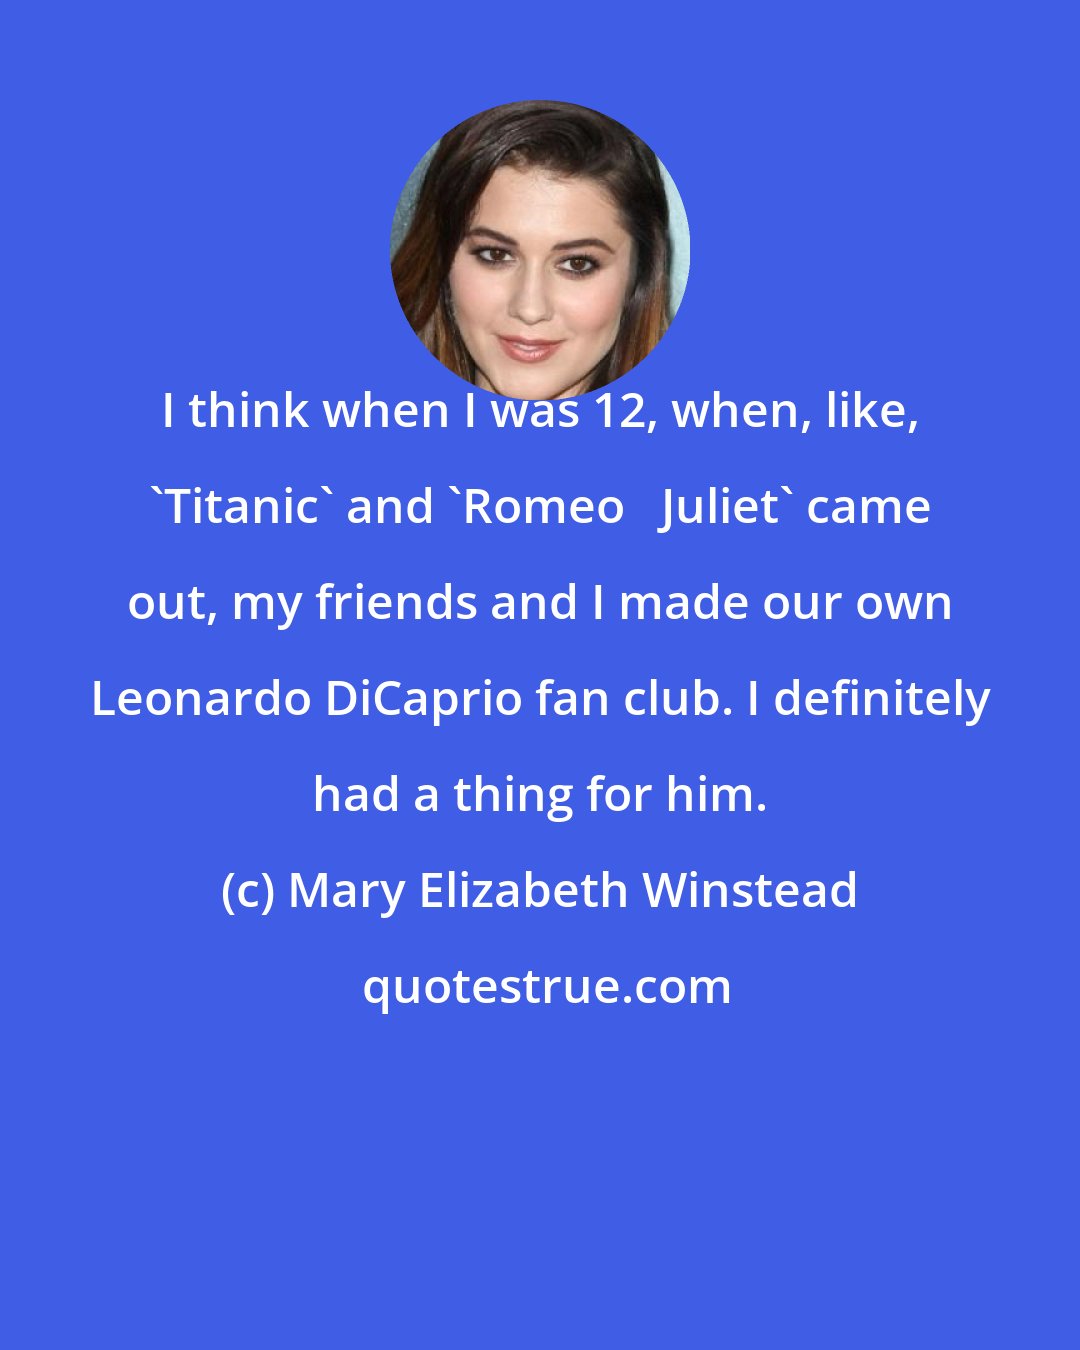 Mary Elizabeth Winstead: I think when I was 12, when, like, 'Titanic' and 'Romeo + Juliet' came out, my friends and I made our own Leonardo DiCaprio fan club. I definitely had a thing for him.